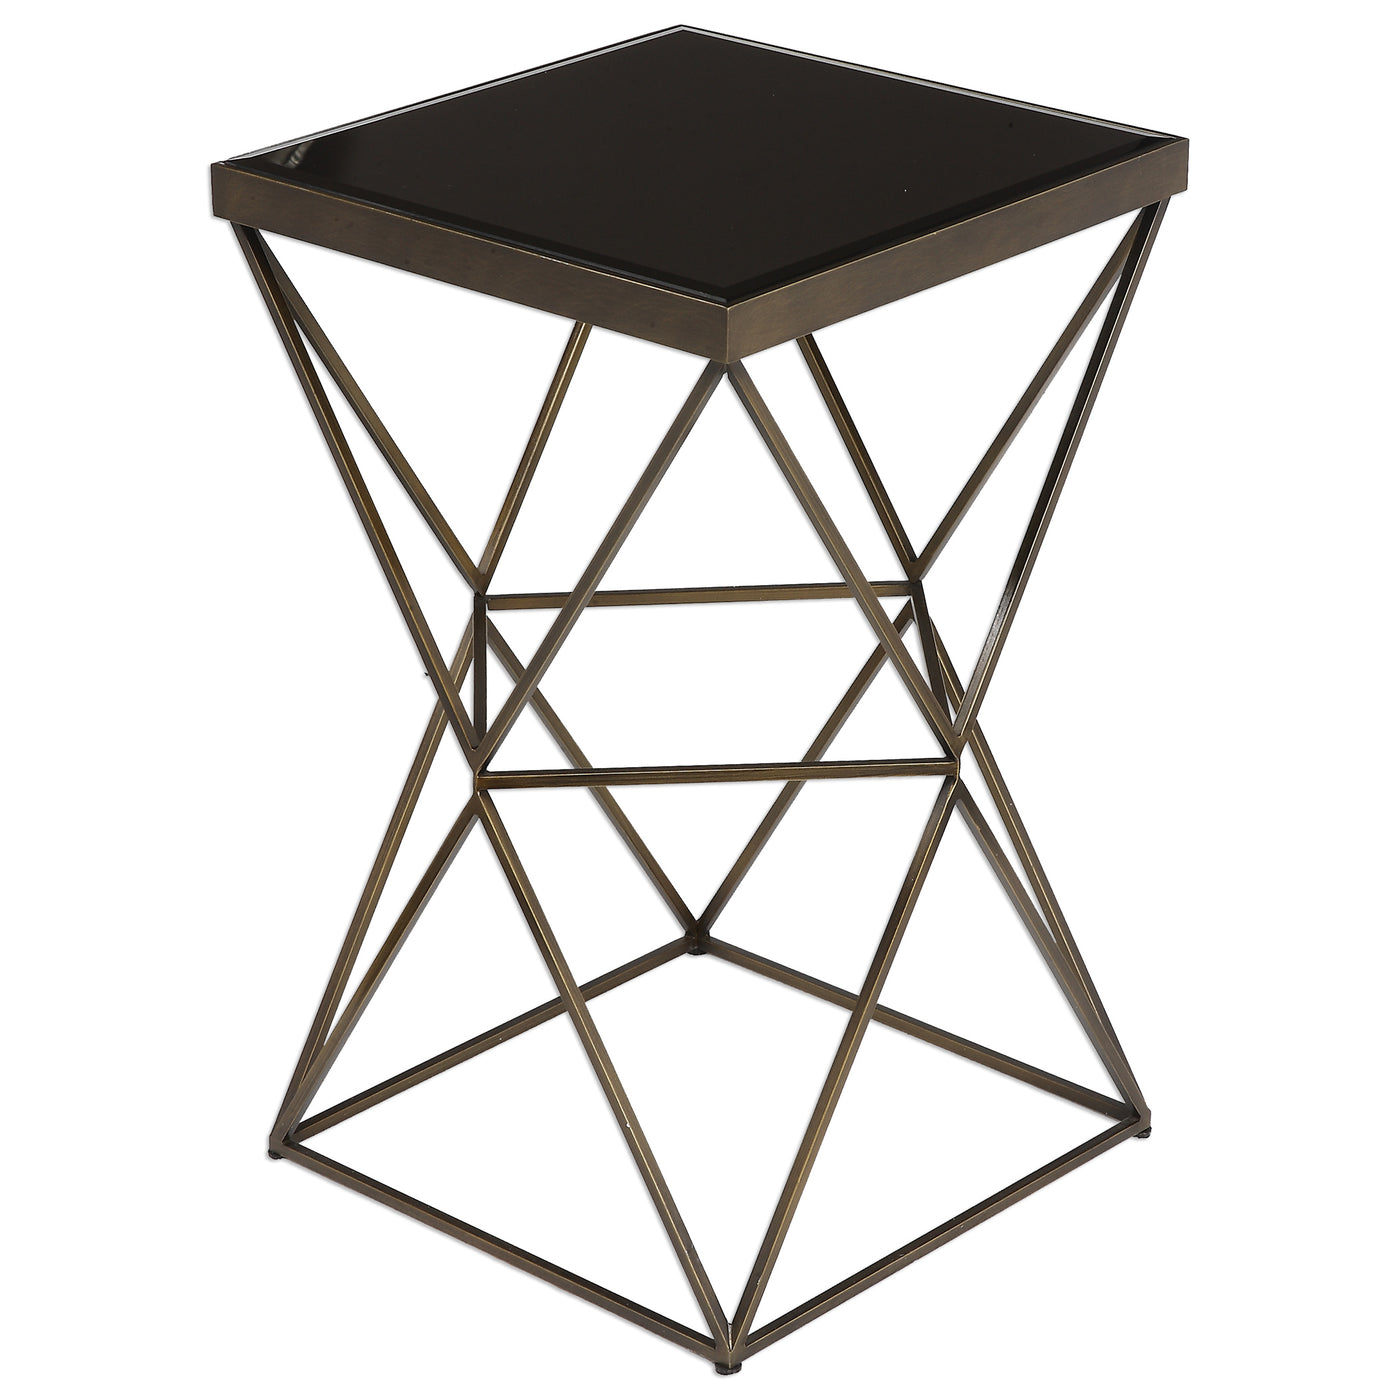 Featuring A Modern Geometric Style Base In Antique Bronze Finished Steel, Topped With Beveled Black Tempered Glass.